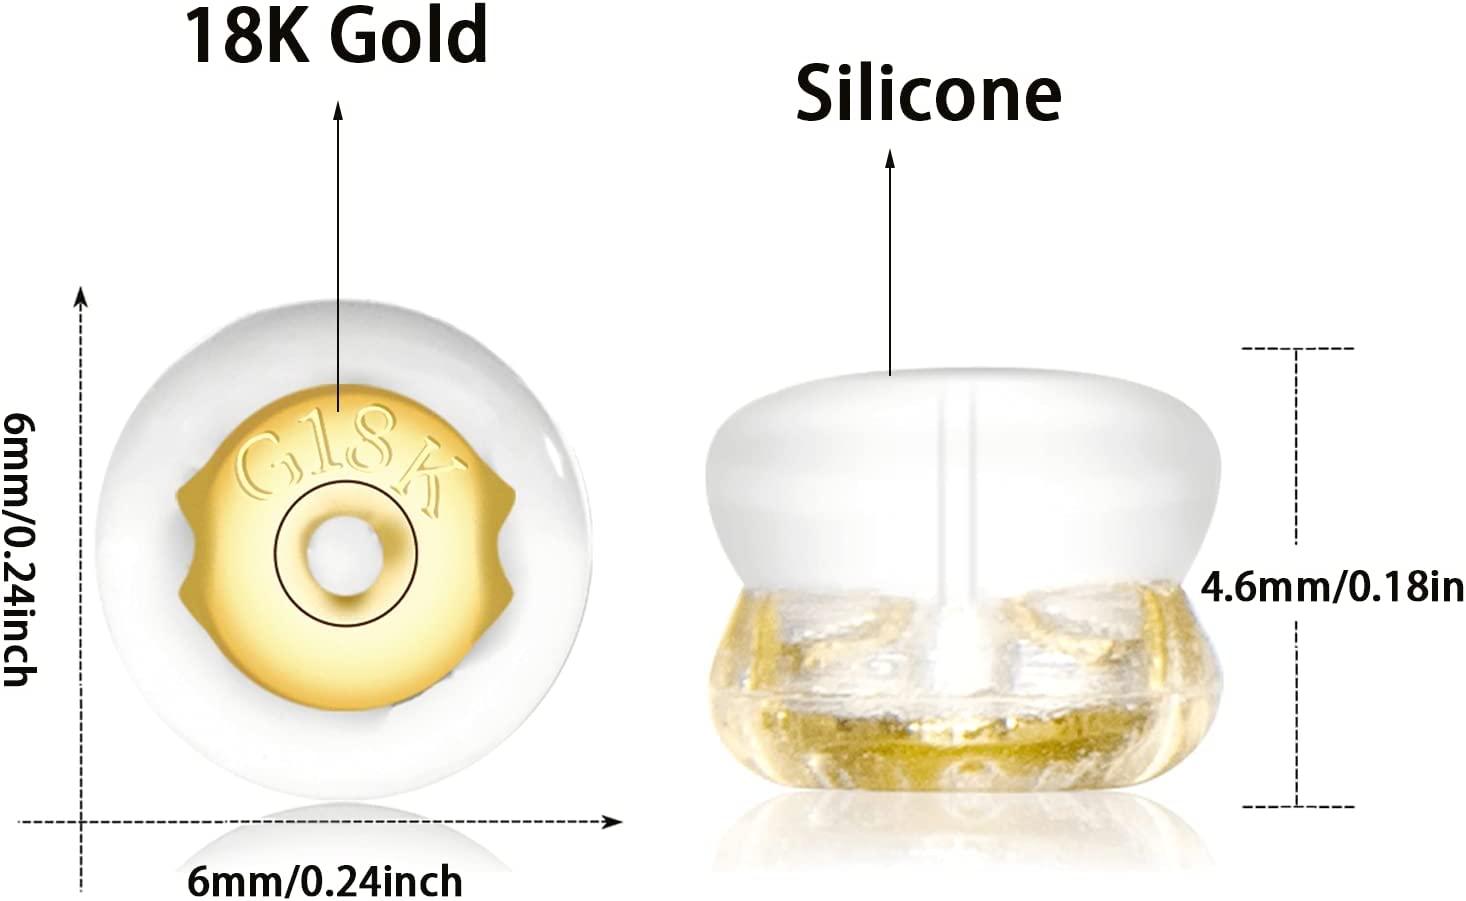 Earring Backs,18K Gold Silicone Earring Backs for Studs /Droopy  Ears,Locking Secure Earring Backs for Heavy Earring,No-Irritate  Hypoallergenice Soft Clear Earring Backs for Adults&Kids 